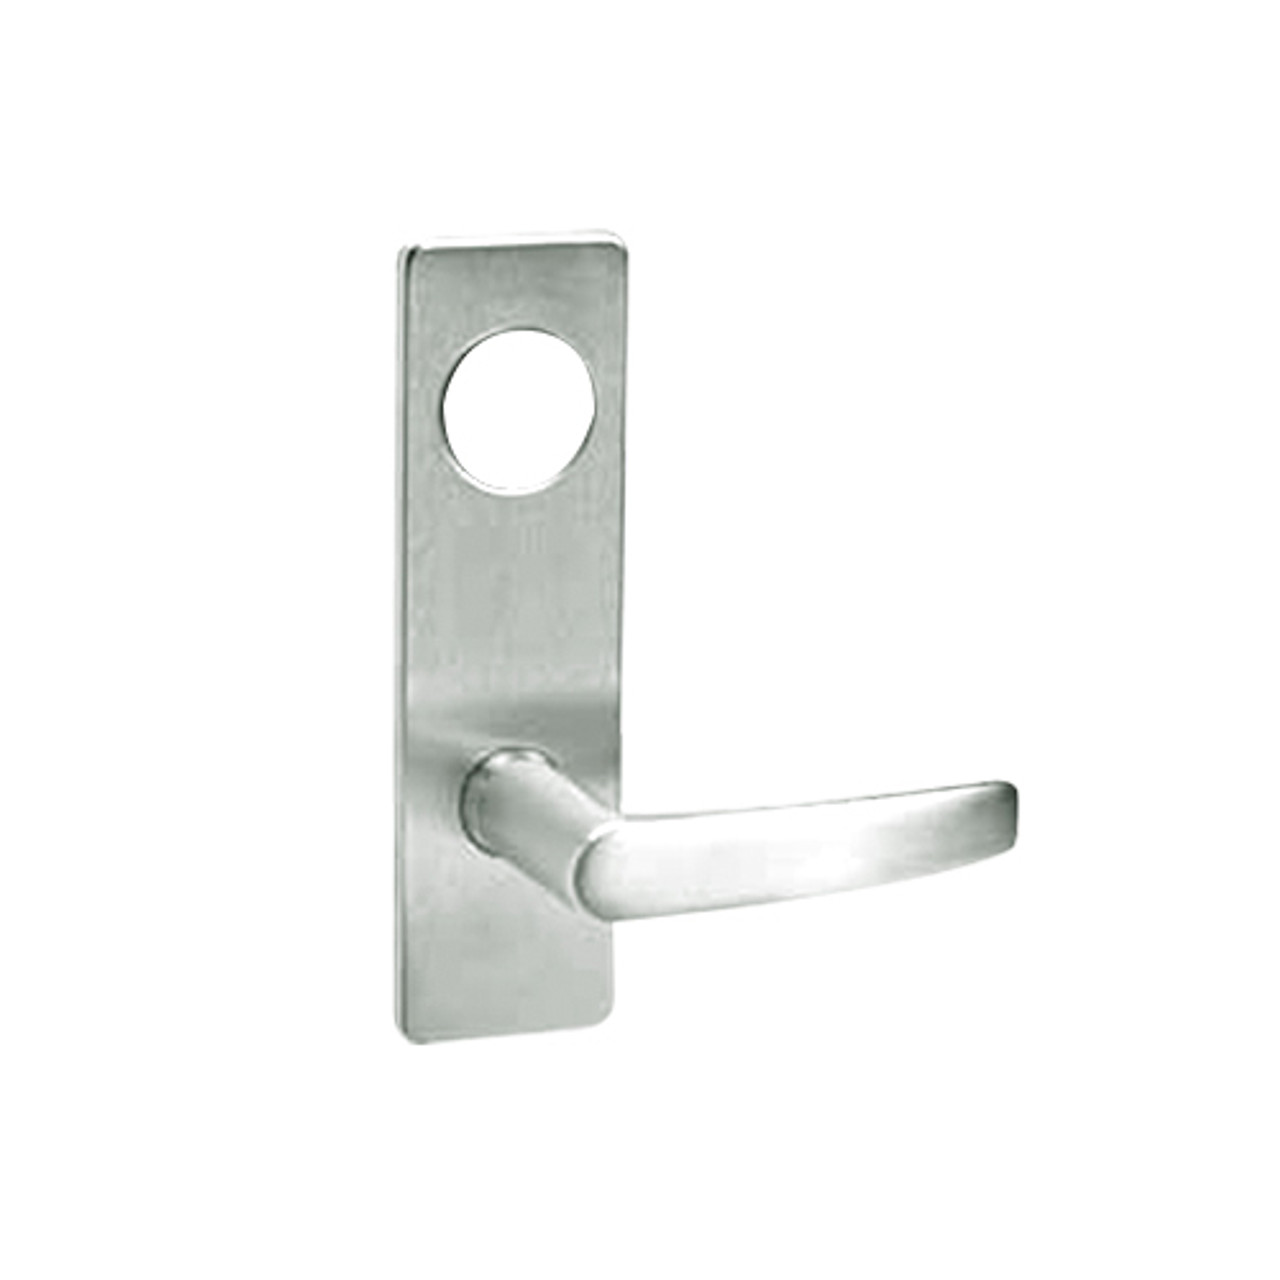 ML2057-ASN-618-LC Corbin Russwin ML2000 Series Mortise Storeroom Locksets with Armstrong Lever in Bright Nickel